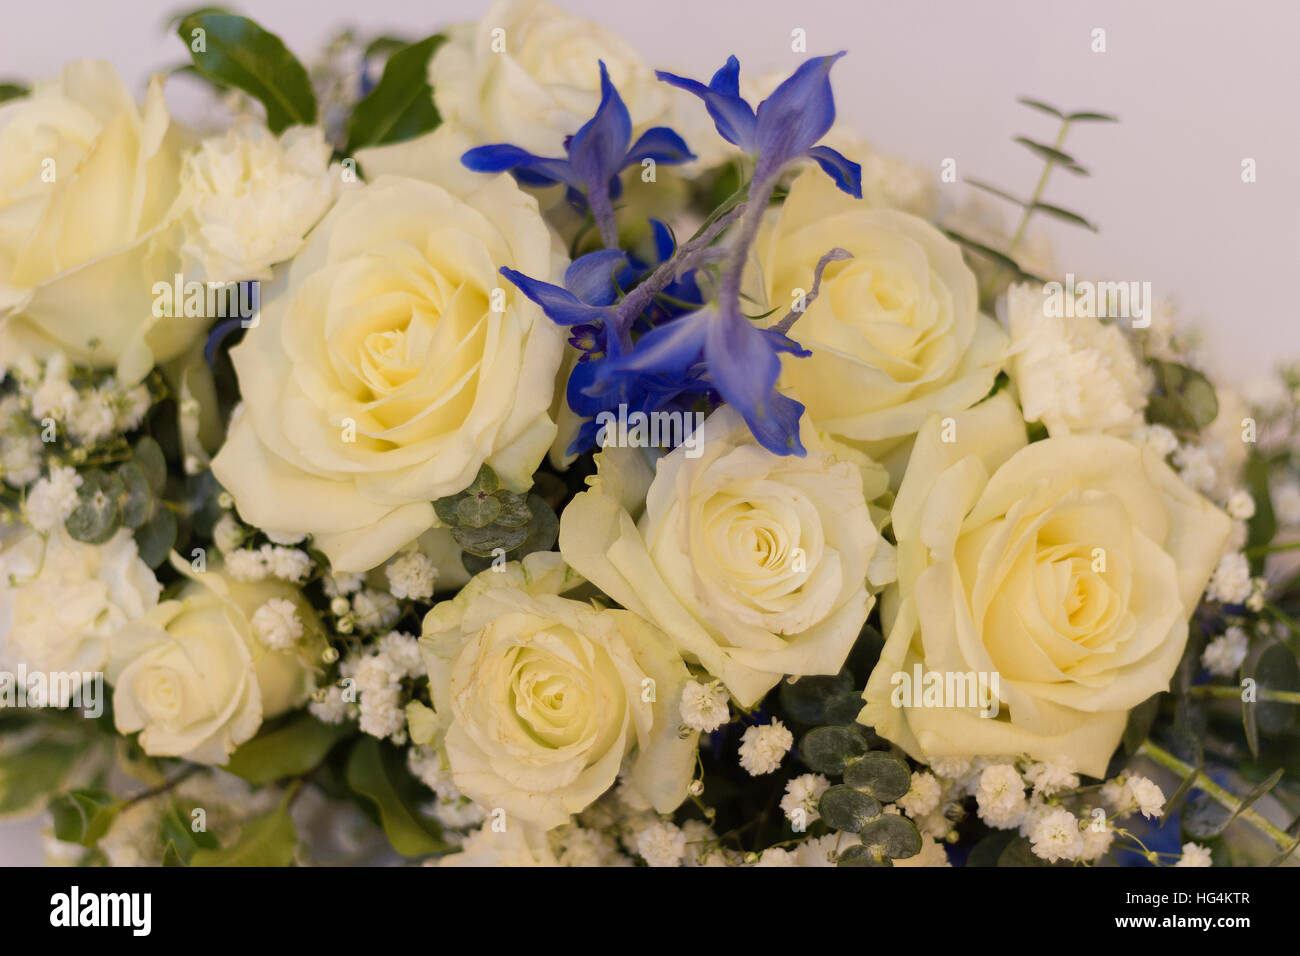 Wedding flower arrangement for top table with roses and blue flowers Stock Photo